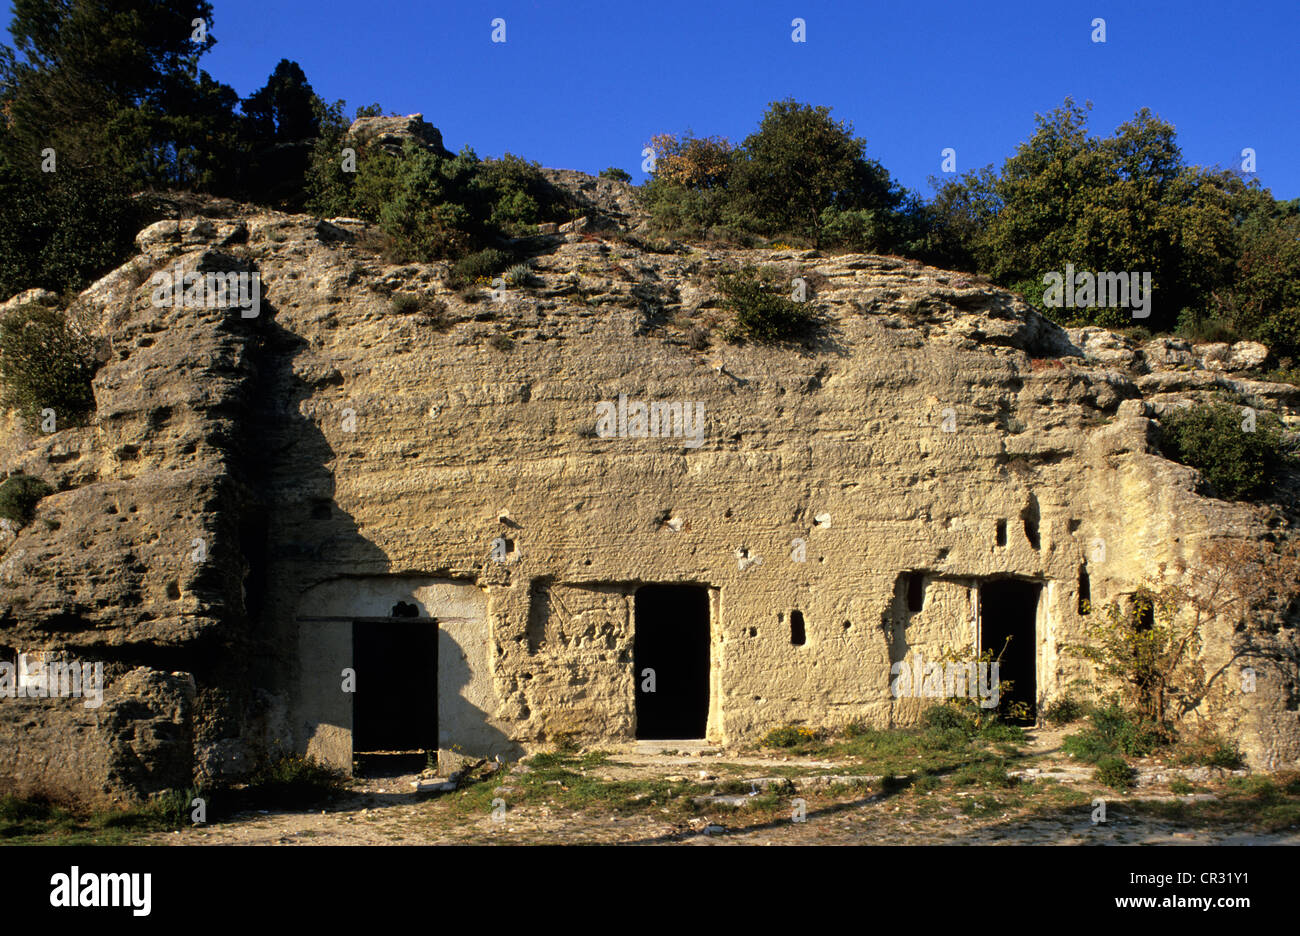 France, Vaucluse, Le Barry, site of half troglodytic dwellings Stock Photo